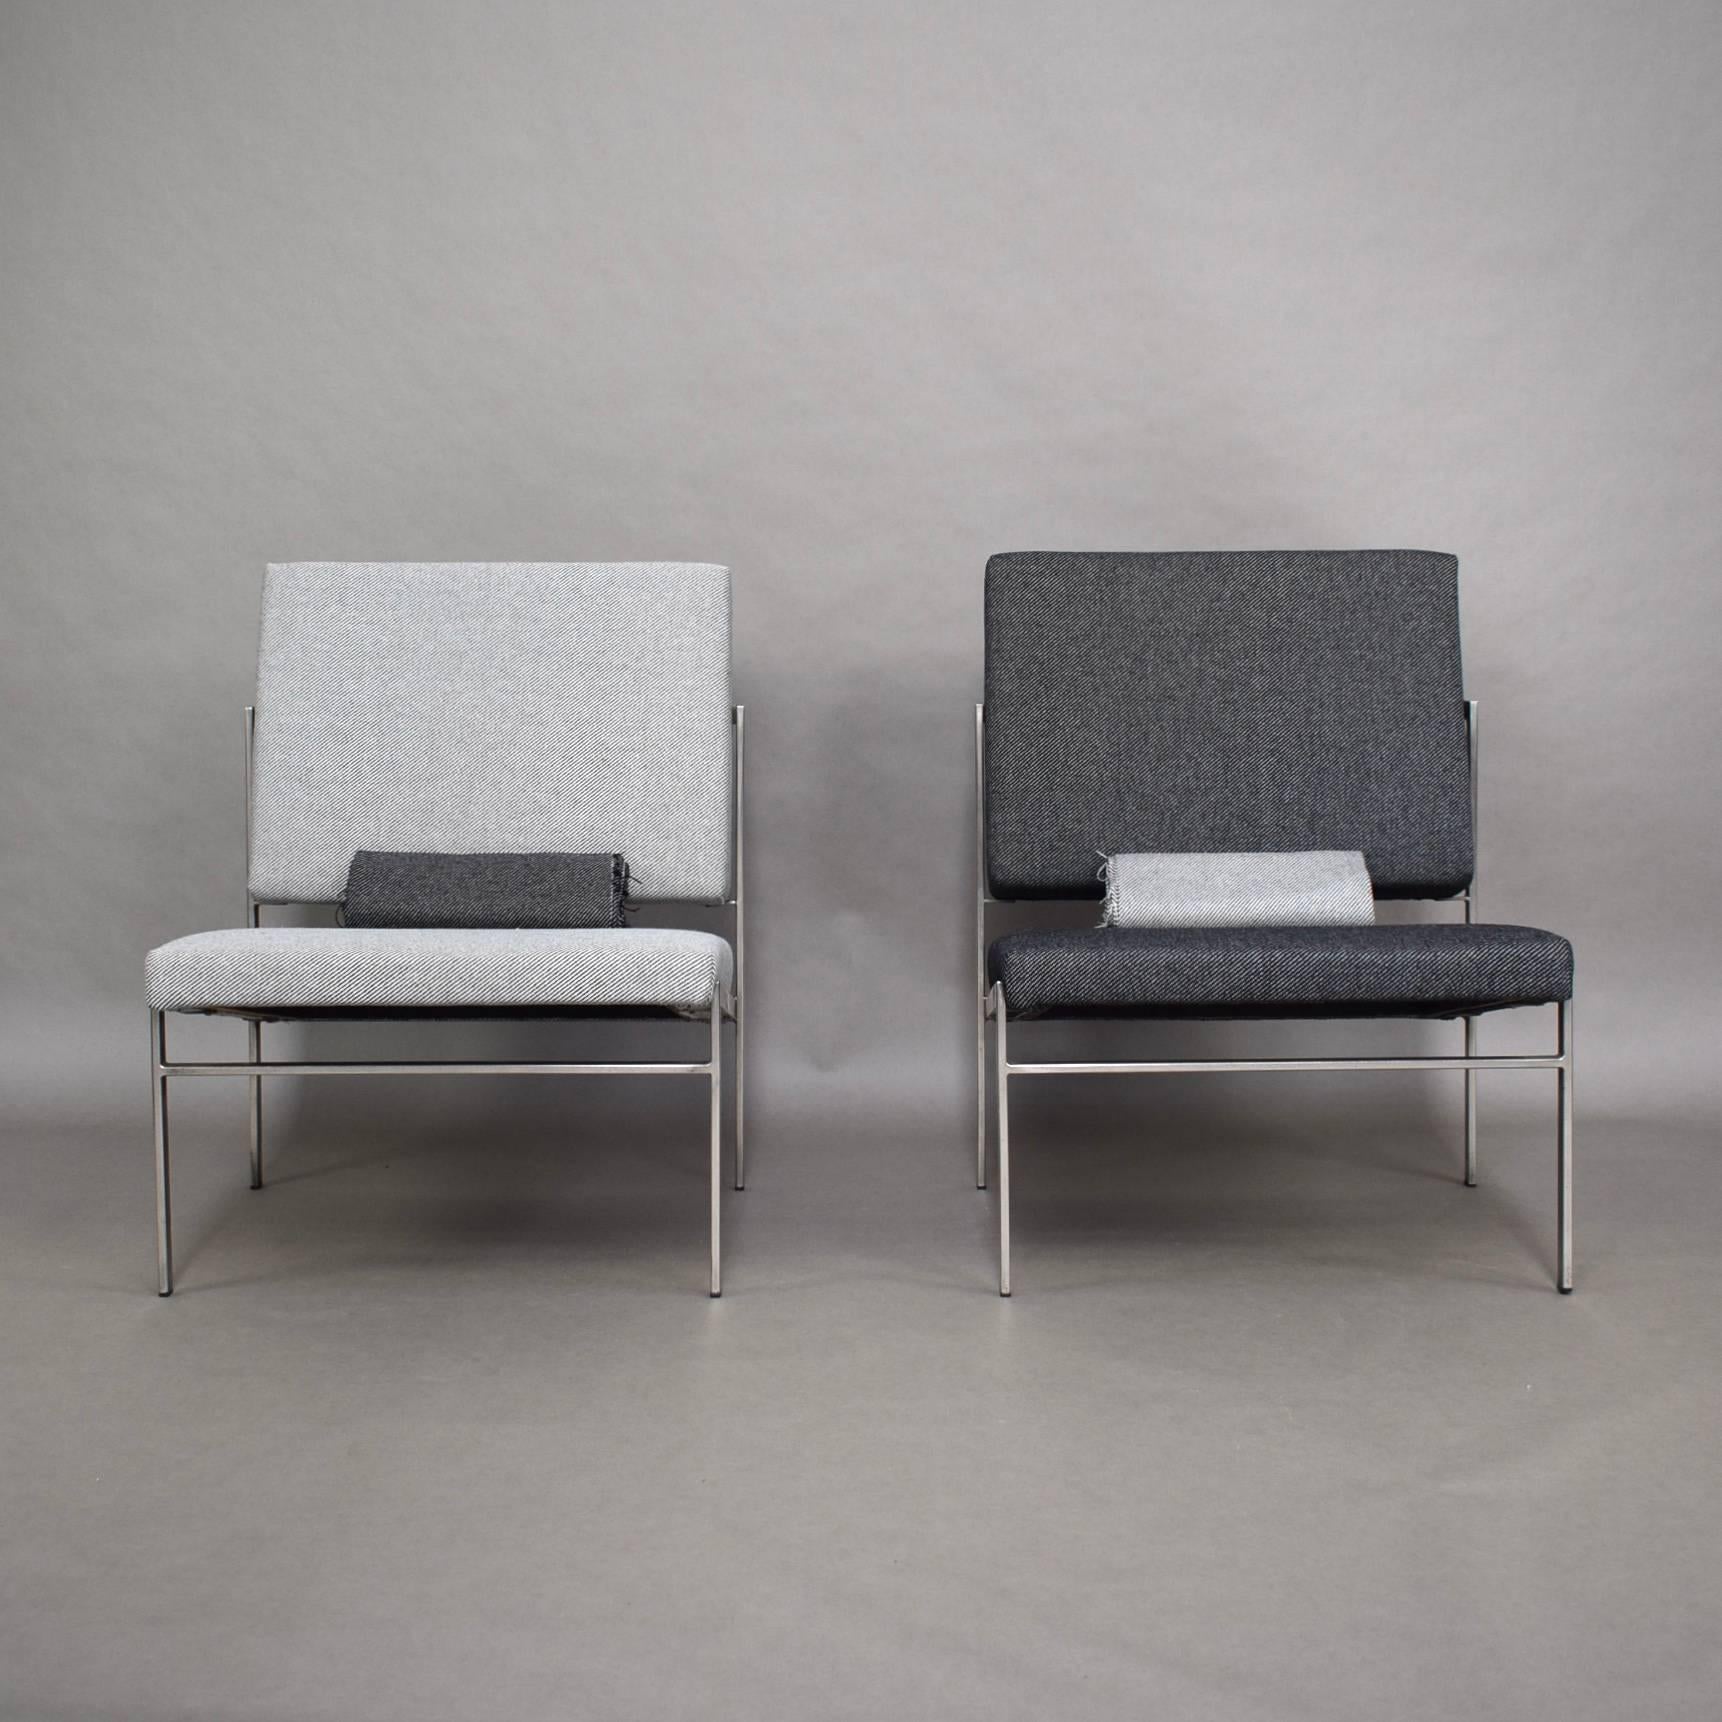 Dutch Pair of Parlez Chairs by Rob Parry